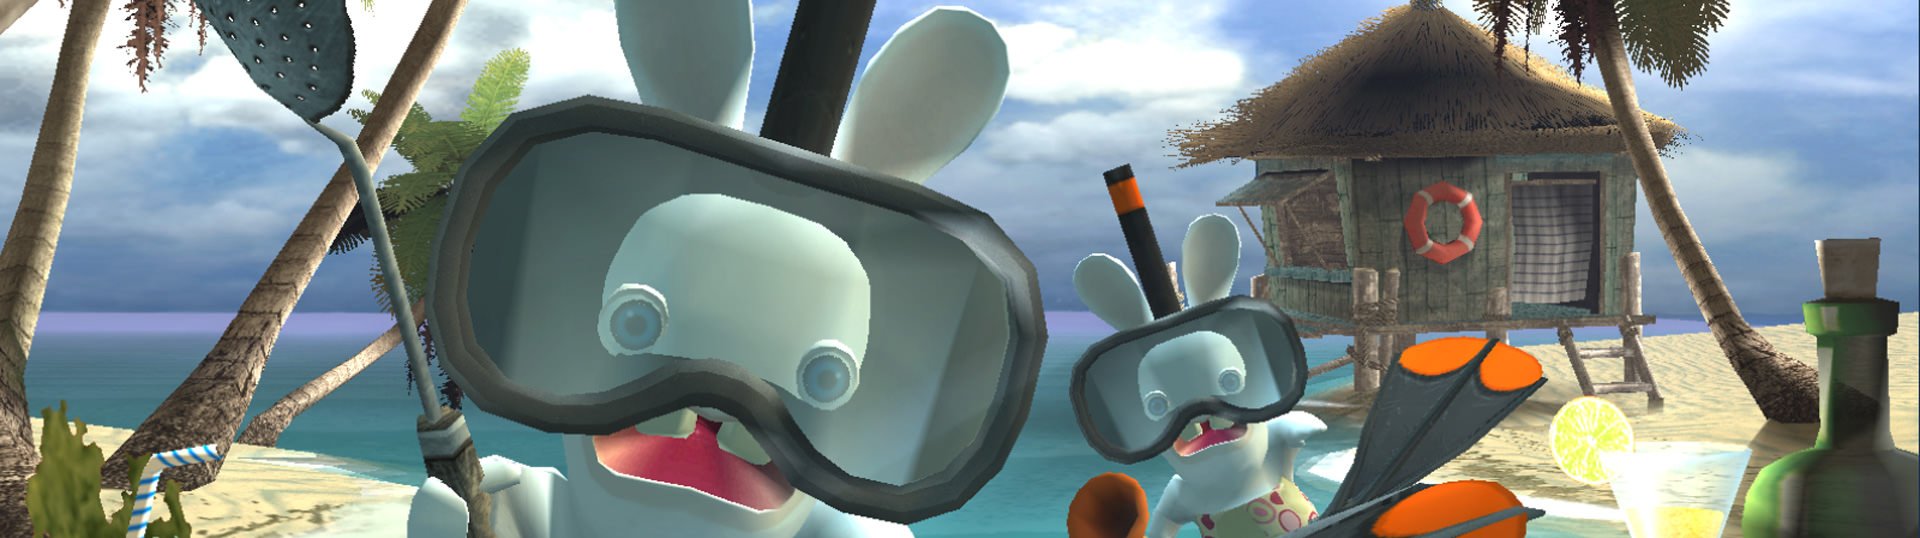 This new Rayman game features the funniest, zaniest, wackiest antics ever when hordes of nasty bunnies invade Rayman’s world and he is enslaved and forced to participate in a series of gladiator- style trials. In order to win his freedom, Rayman must entertain and outwit these crazed, out-of-control bunnies. Rayman Raving Rabbids is the edgiest and most off-the-wall gaming experience in the history of the Rayman® franchise.